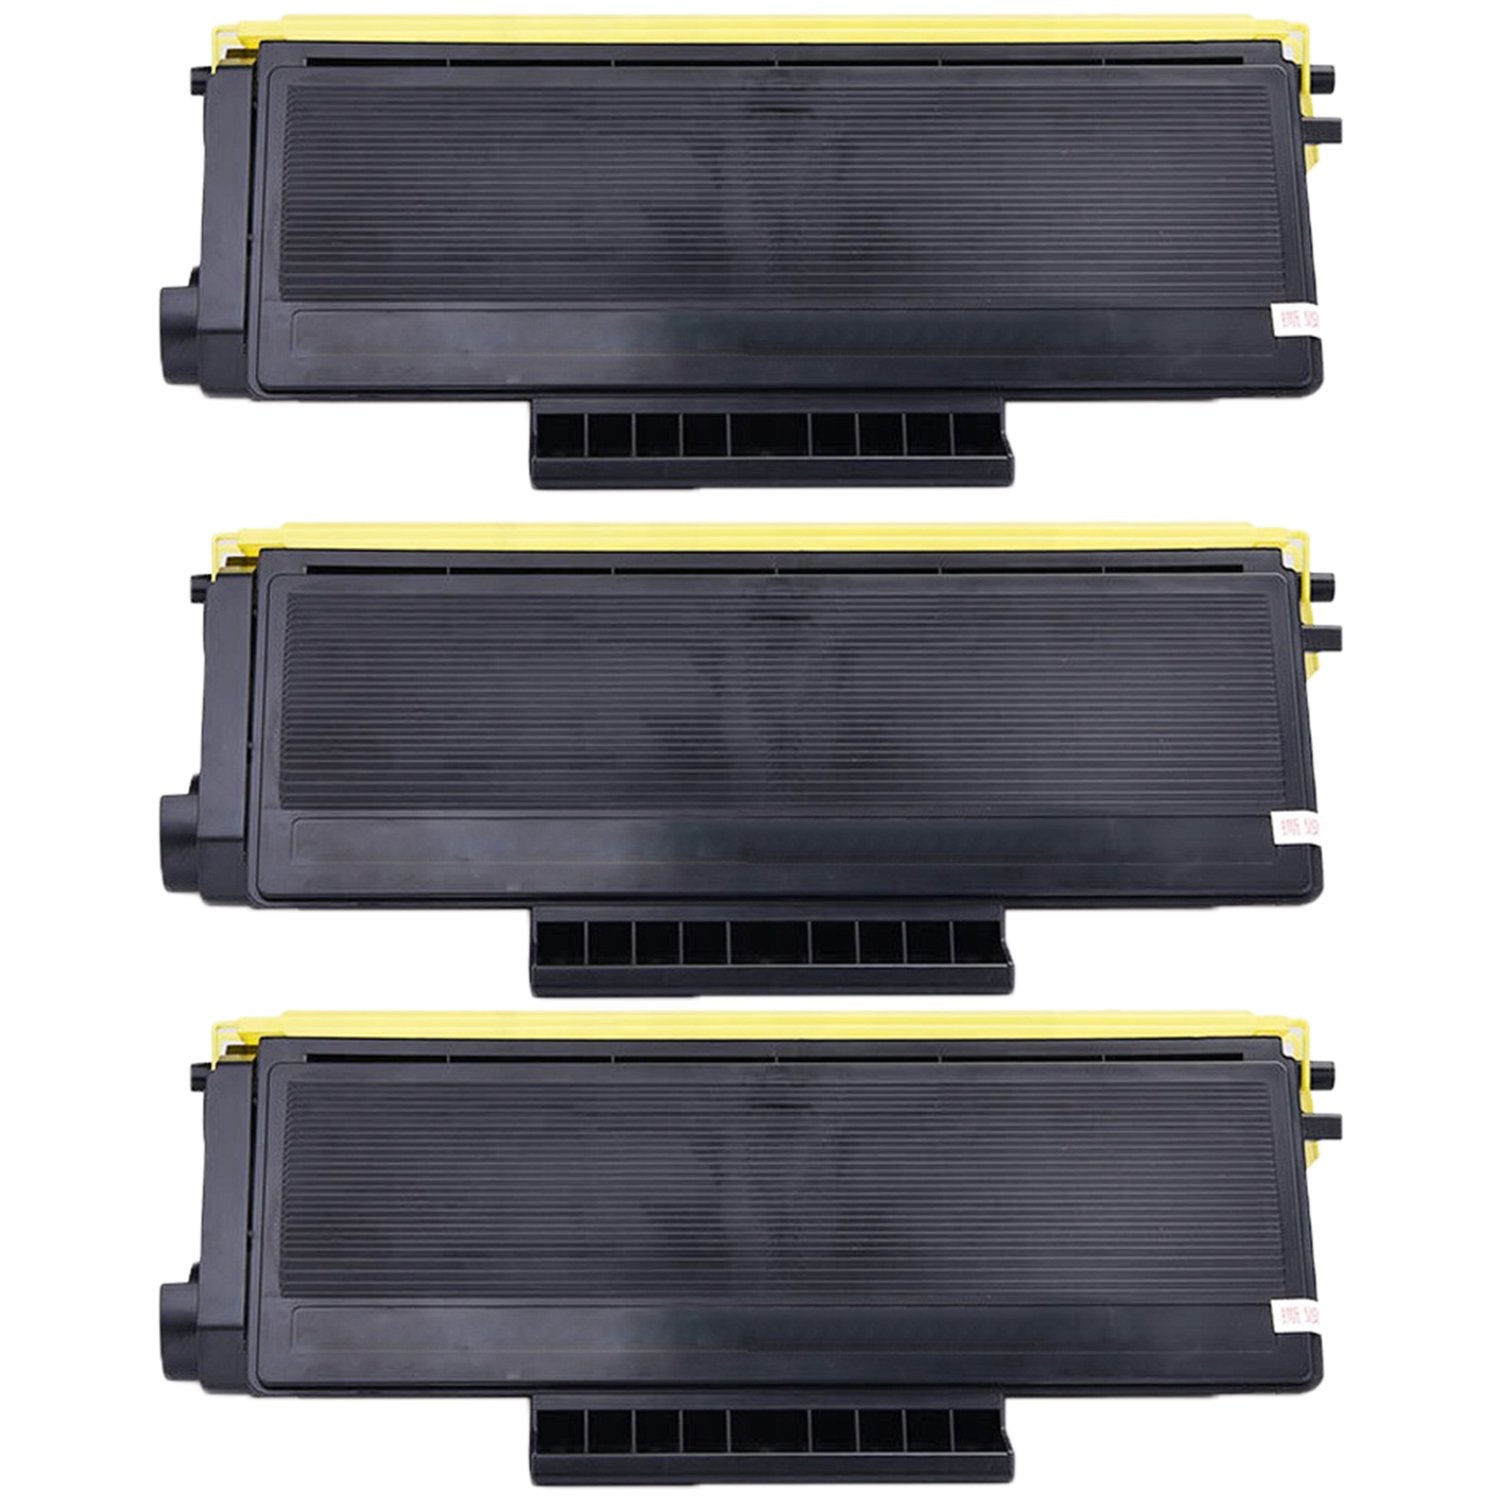 Absolute Toner Compatible Brother TN620 Black Drum Unit Toner Cartridge | Absolute Toner Brother Toner Cartridges